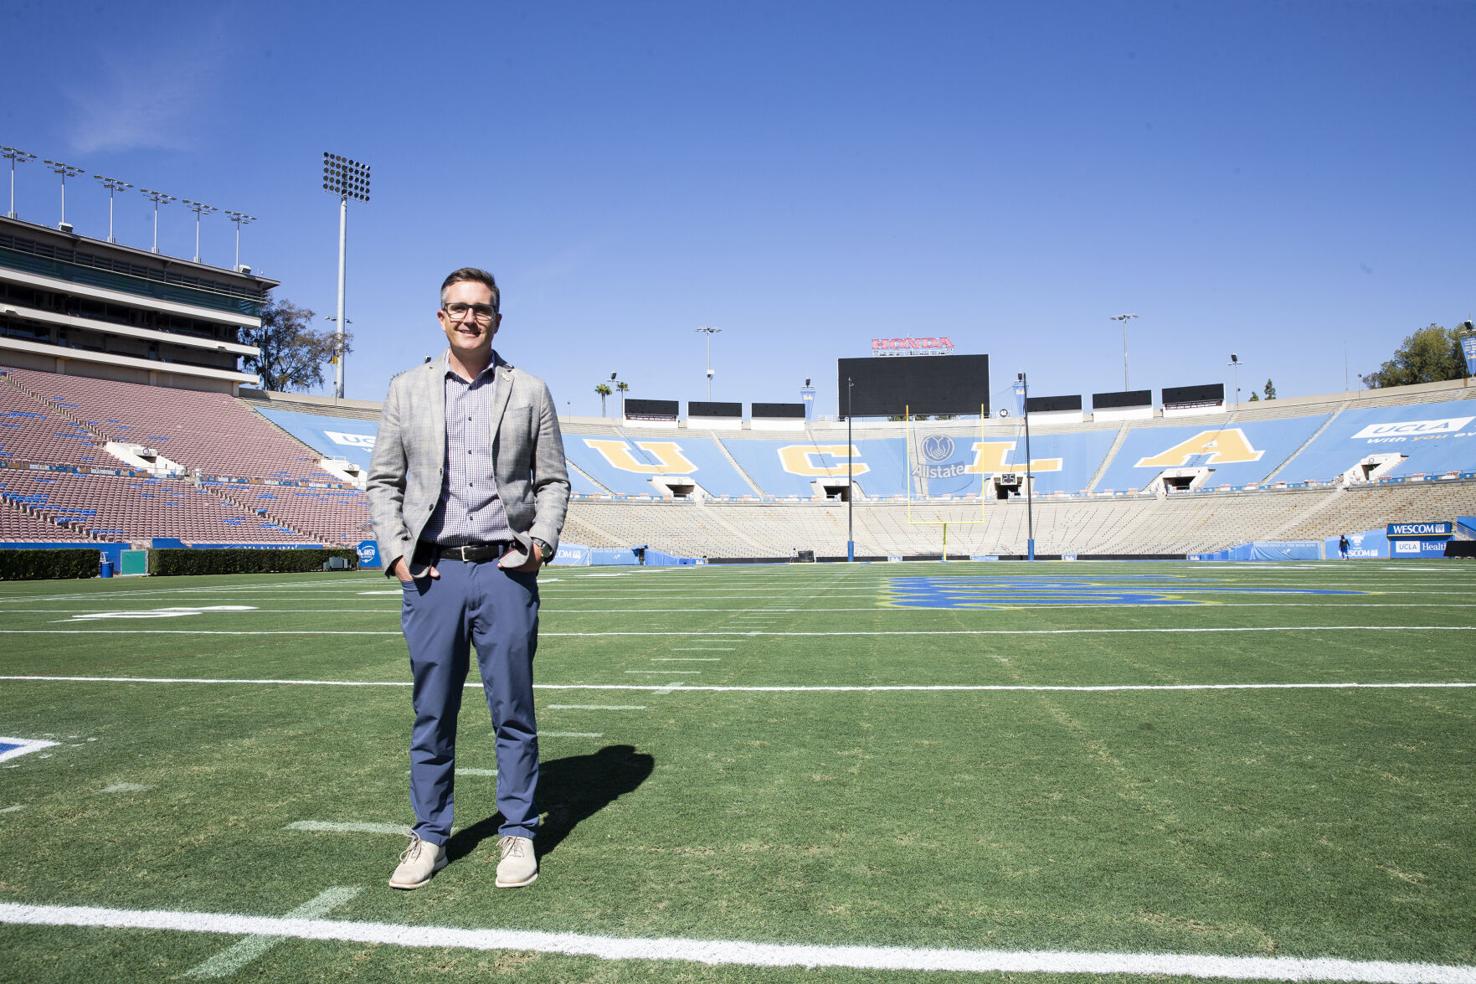 Jens Weiden stands on the field at the Rose Bowl